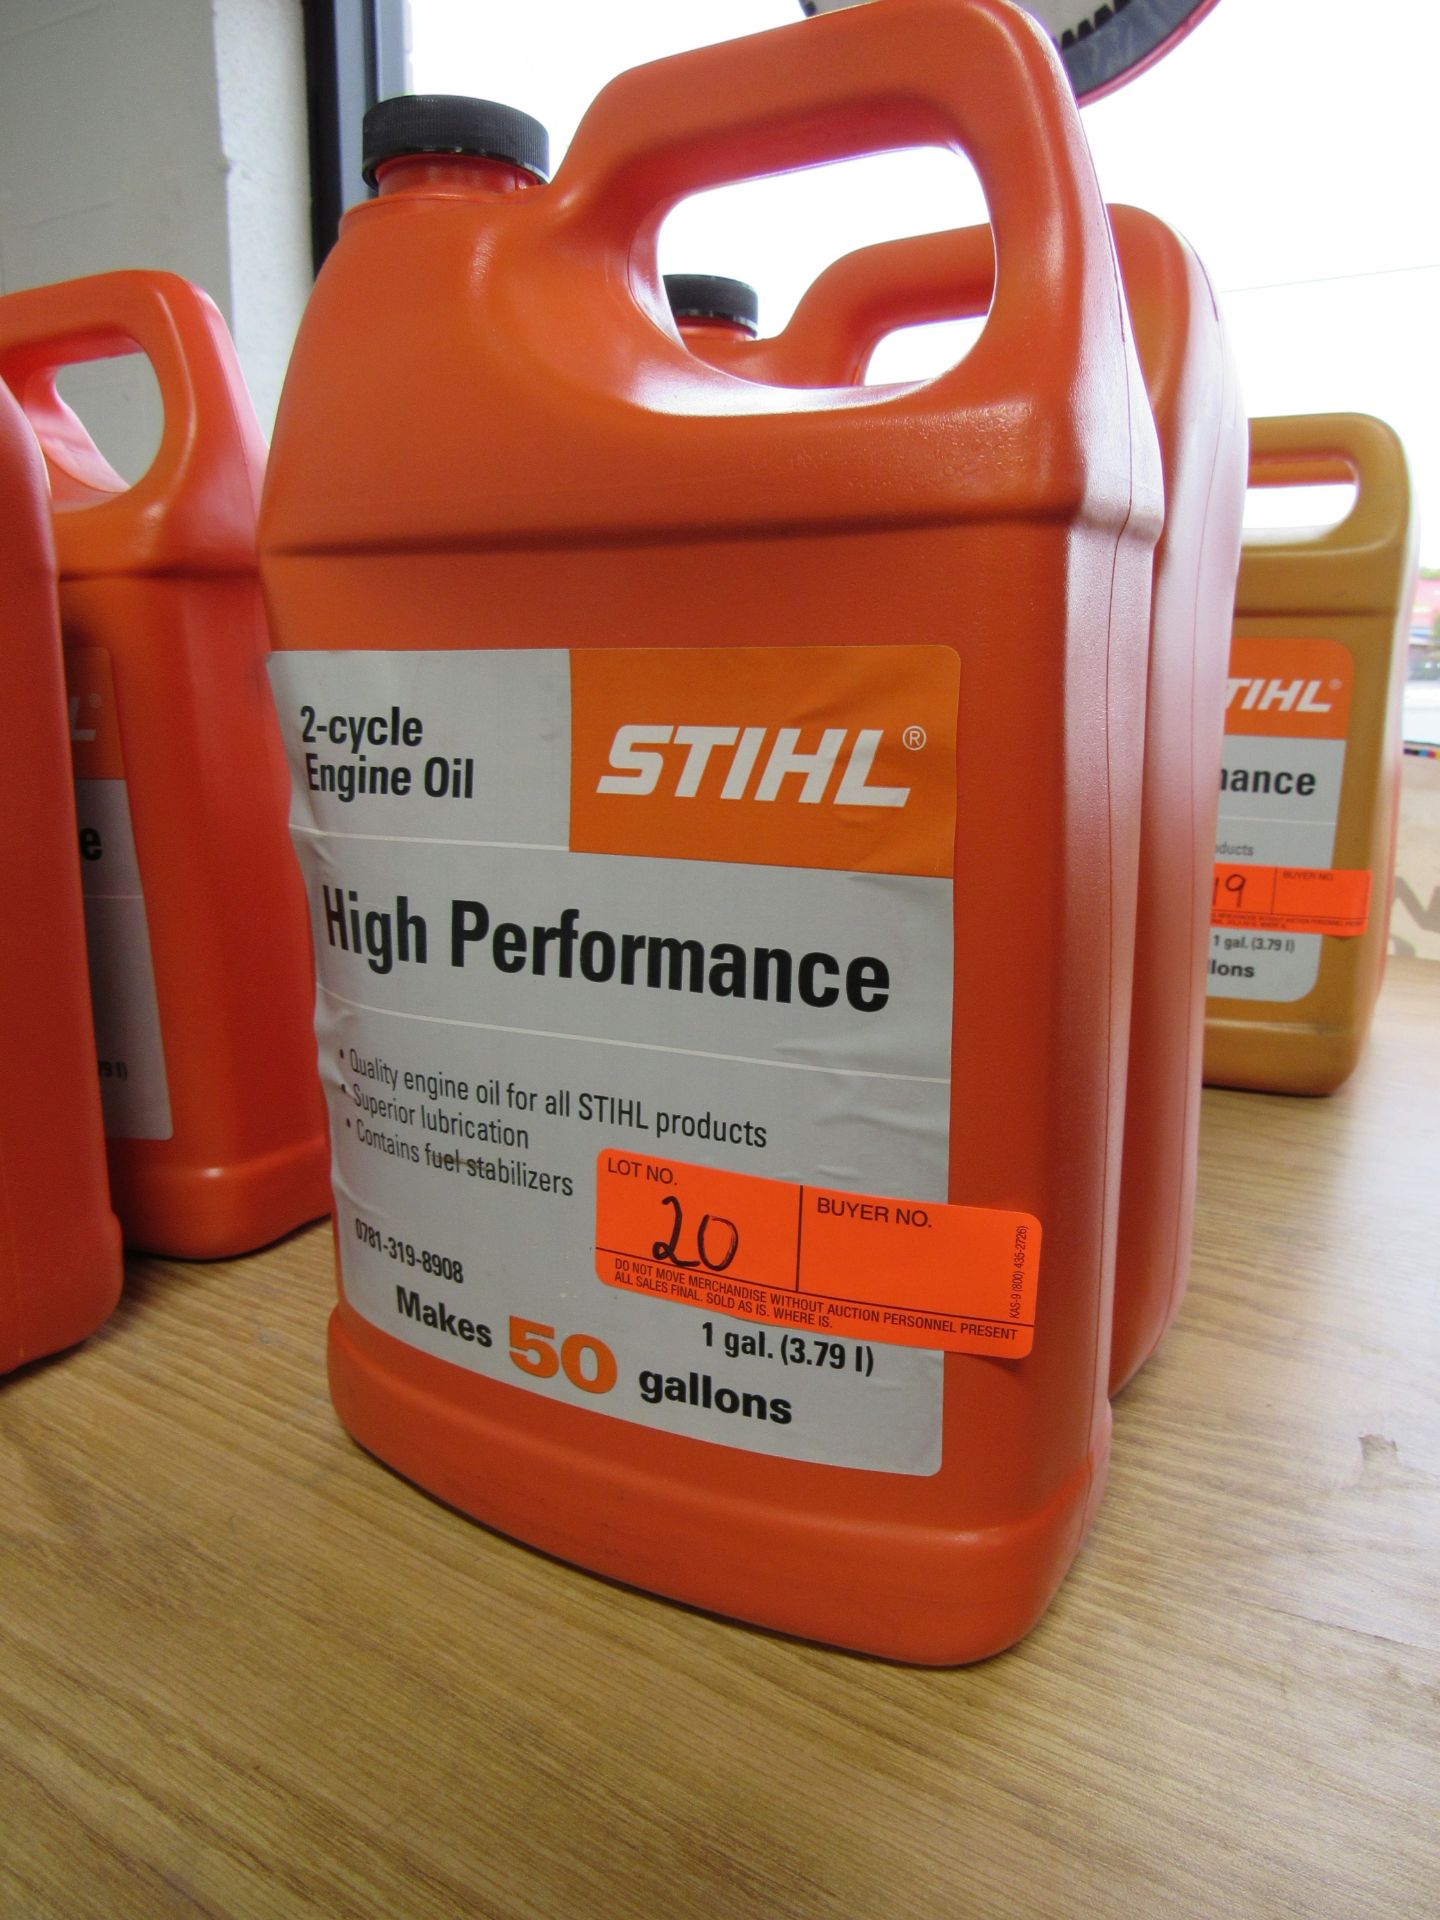 Stihl - two gallons of two-cycle